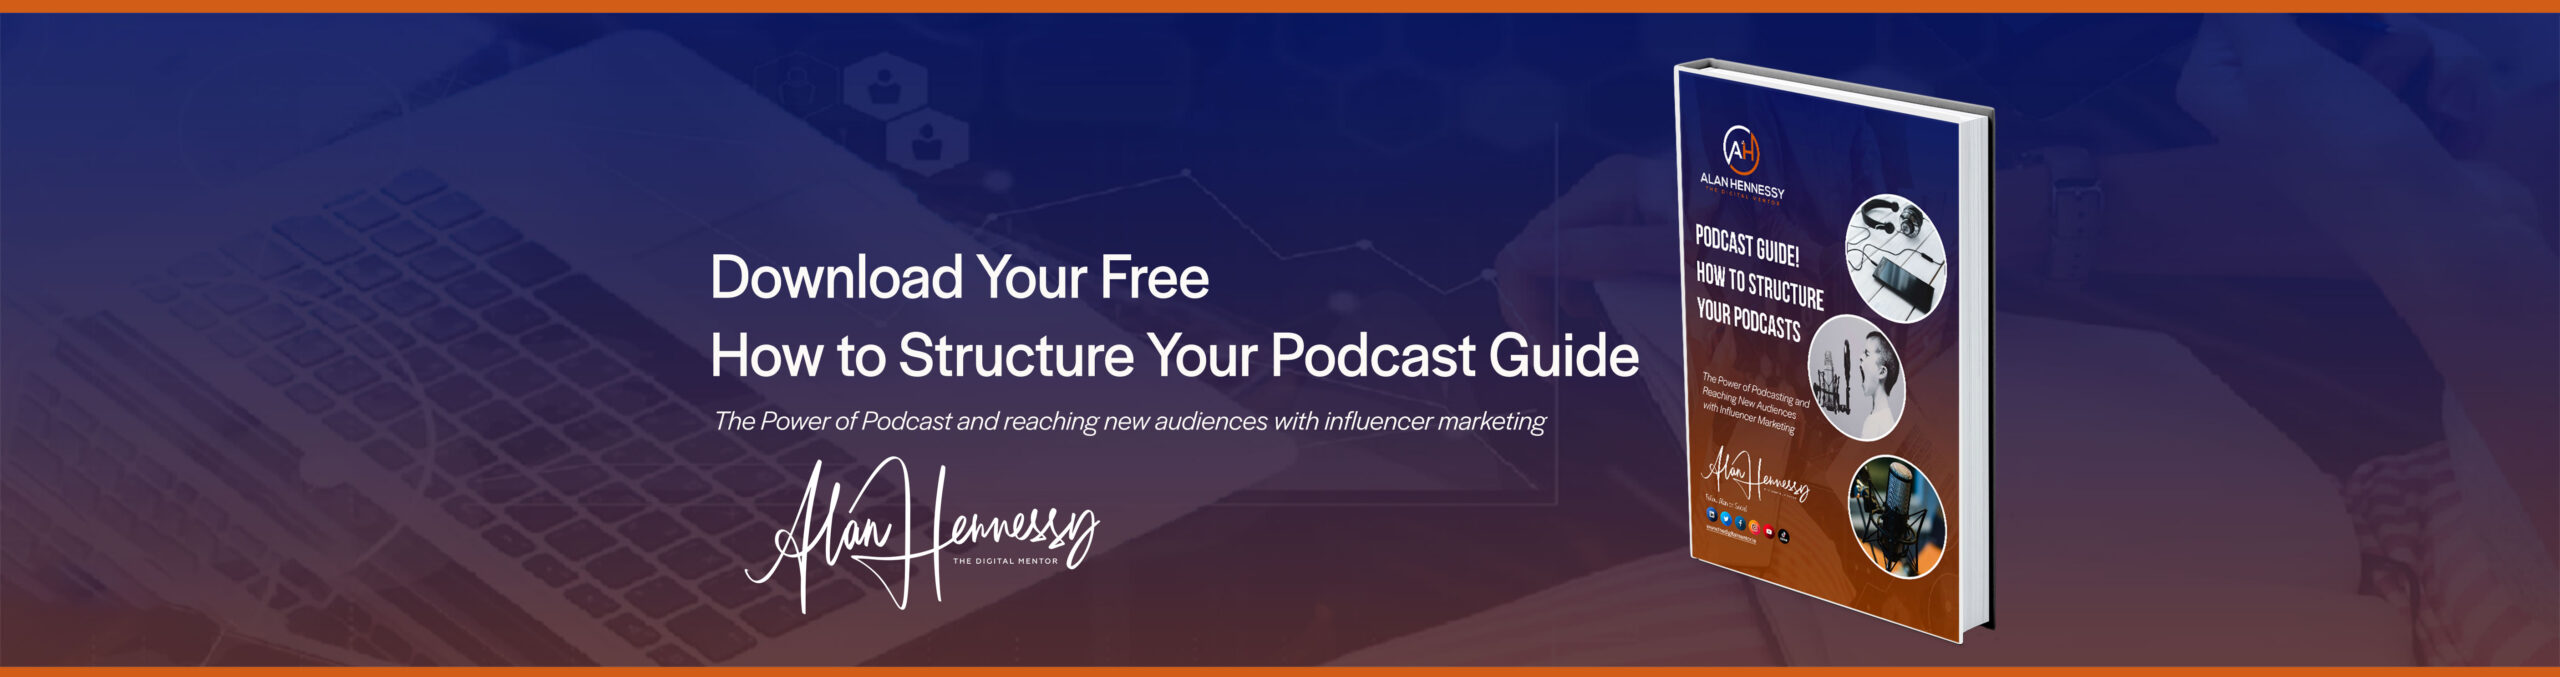 Podcast Structure Guide